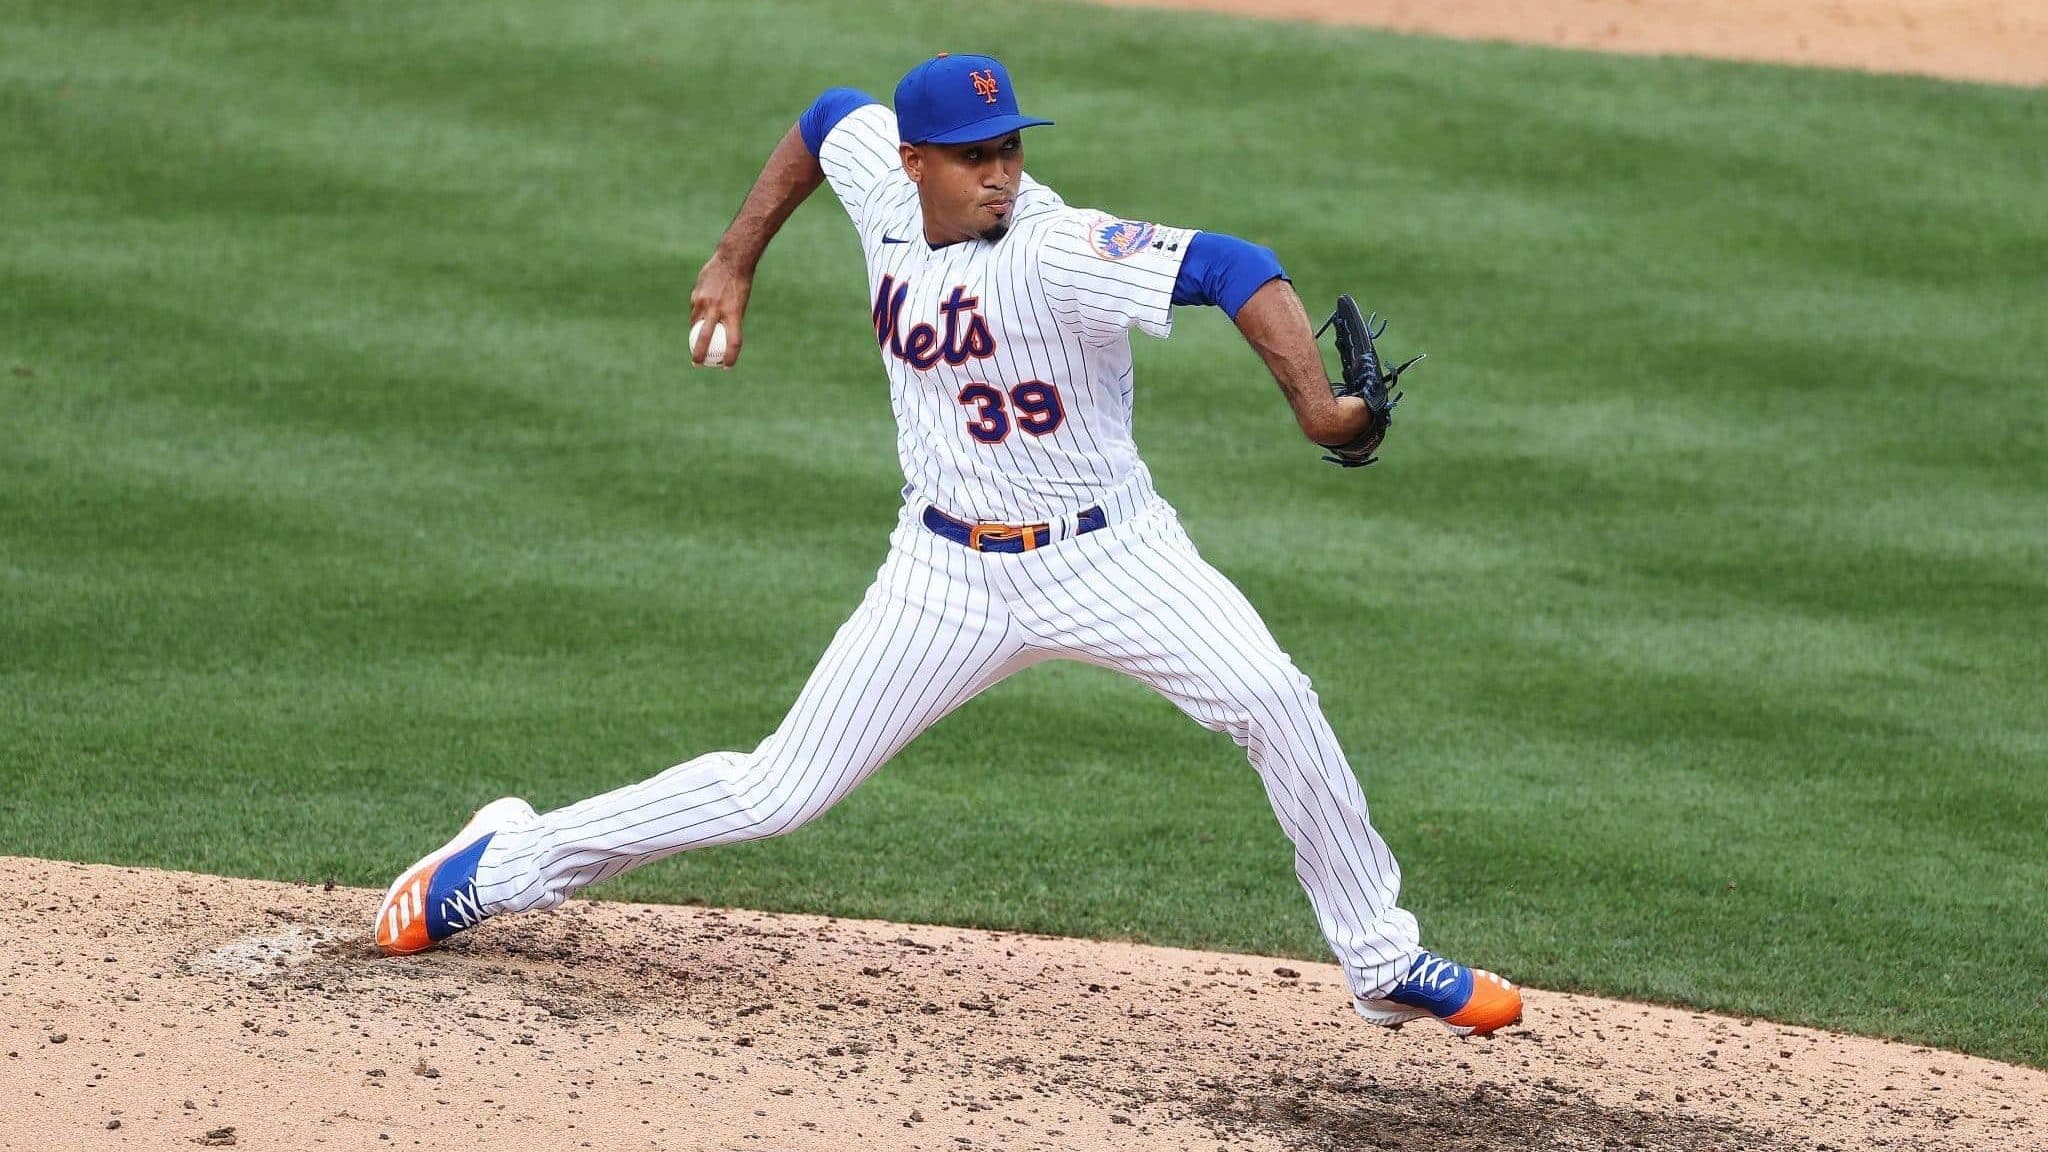 NEW YORK, NEW YORK - JULY 24: Edwin Diaz #39 of the New York Mets pitches in the ninth inning against the Atlanta Braves and will earn his first save as the Mets win the game 1-0 during Opening Day at Citi Field on July 24, 2020 in New York City. The 2020 season had been postponed since March due to the COVID-19 pandemic.